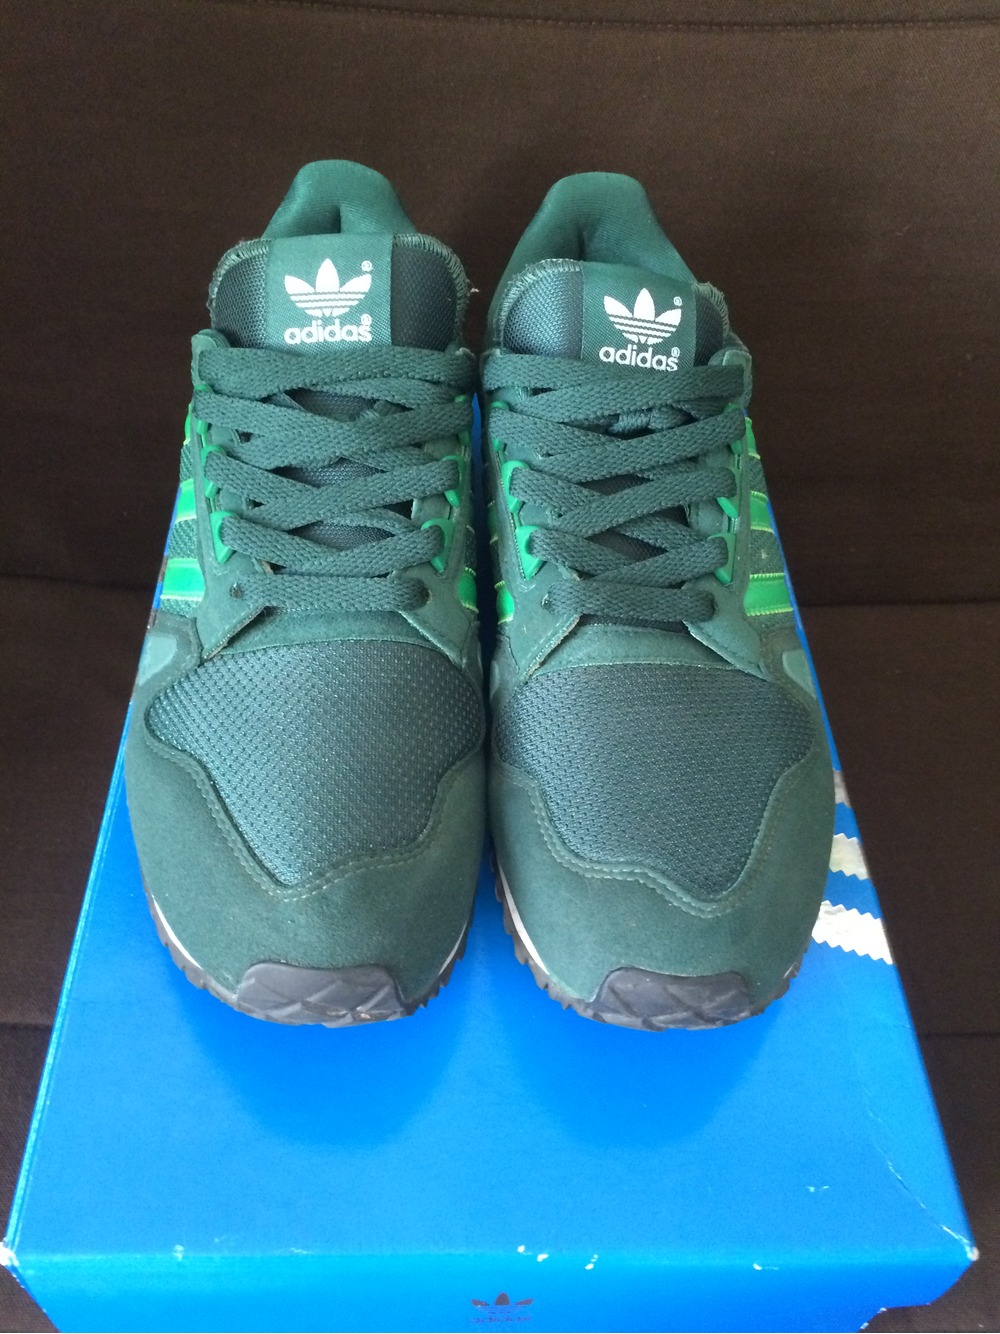 where can i buy adidas zx 450 148d1 f78c2